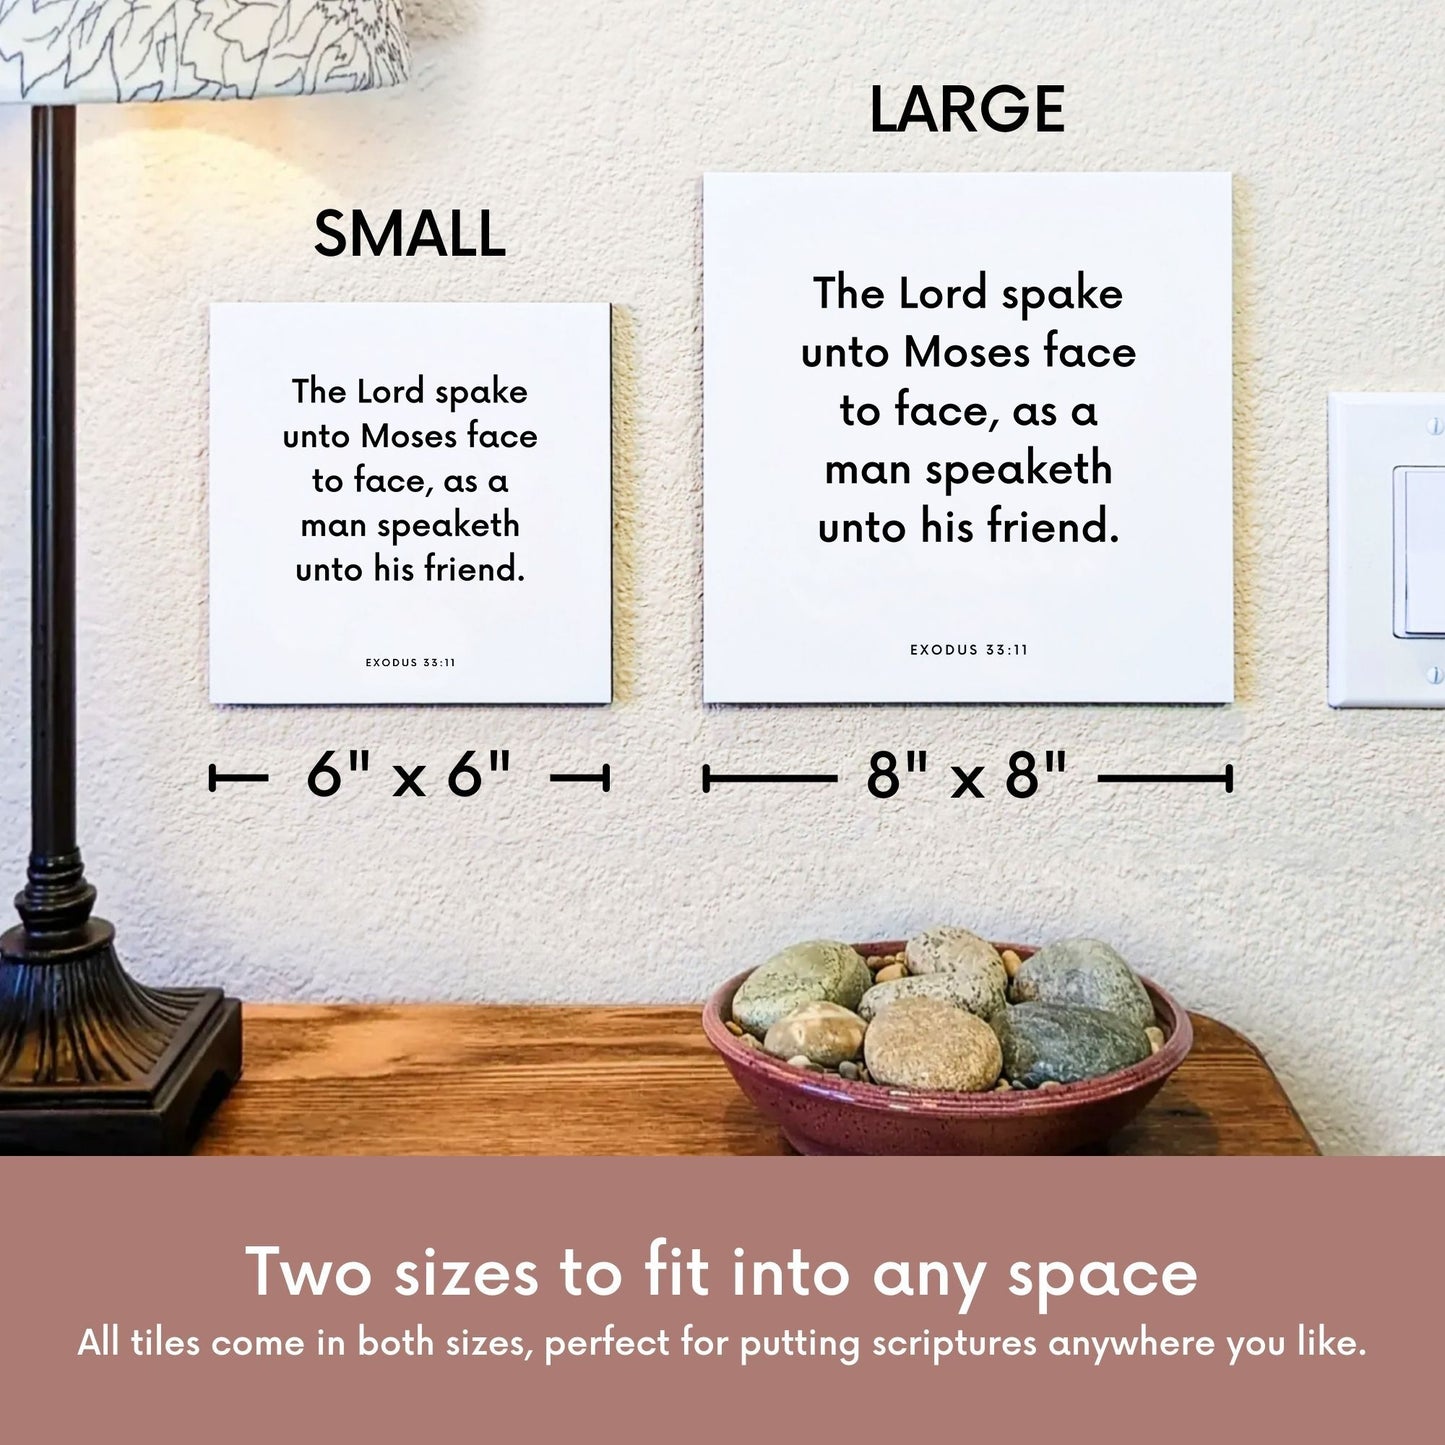 Scripture tile size comparison for Exodus 33:11 - "The Lord spake unto Moses face to face"